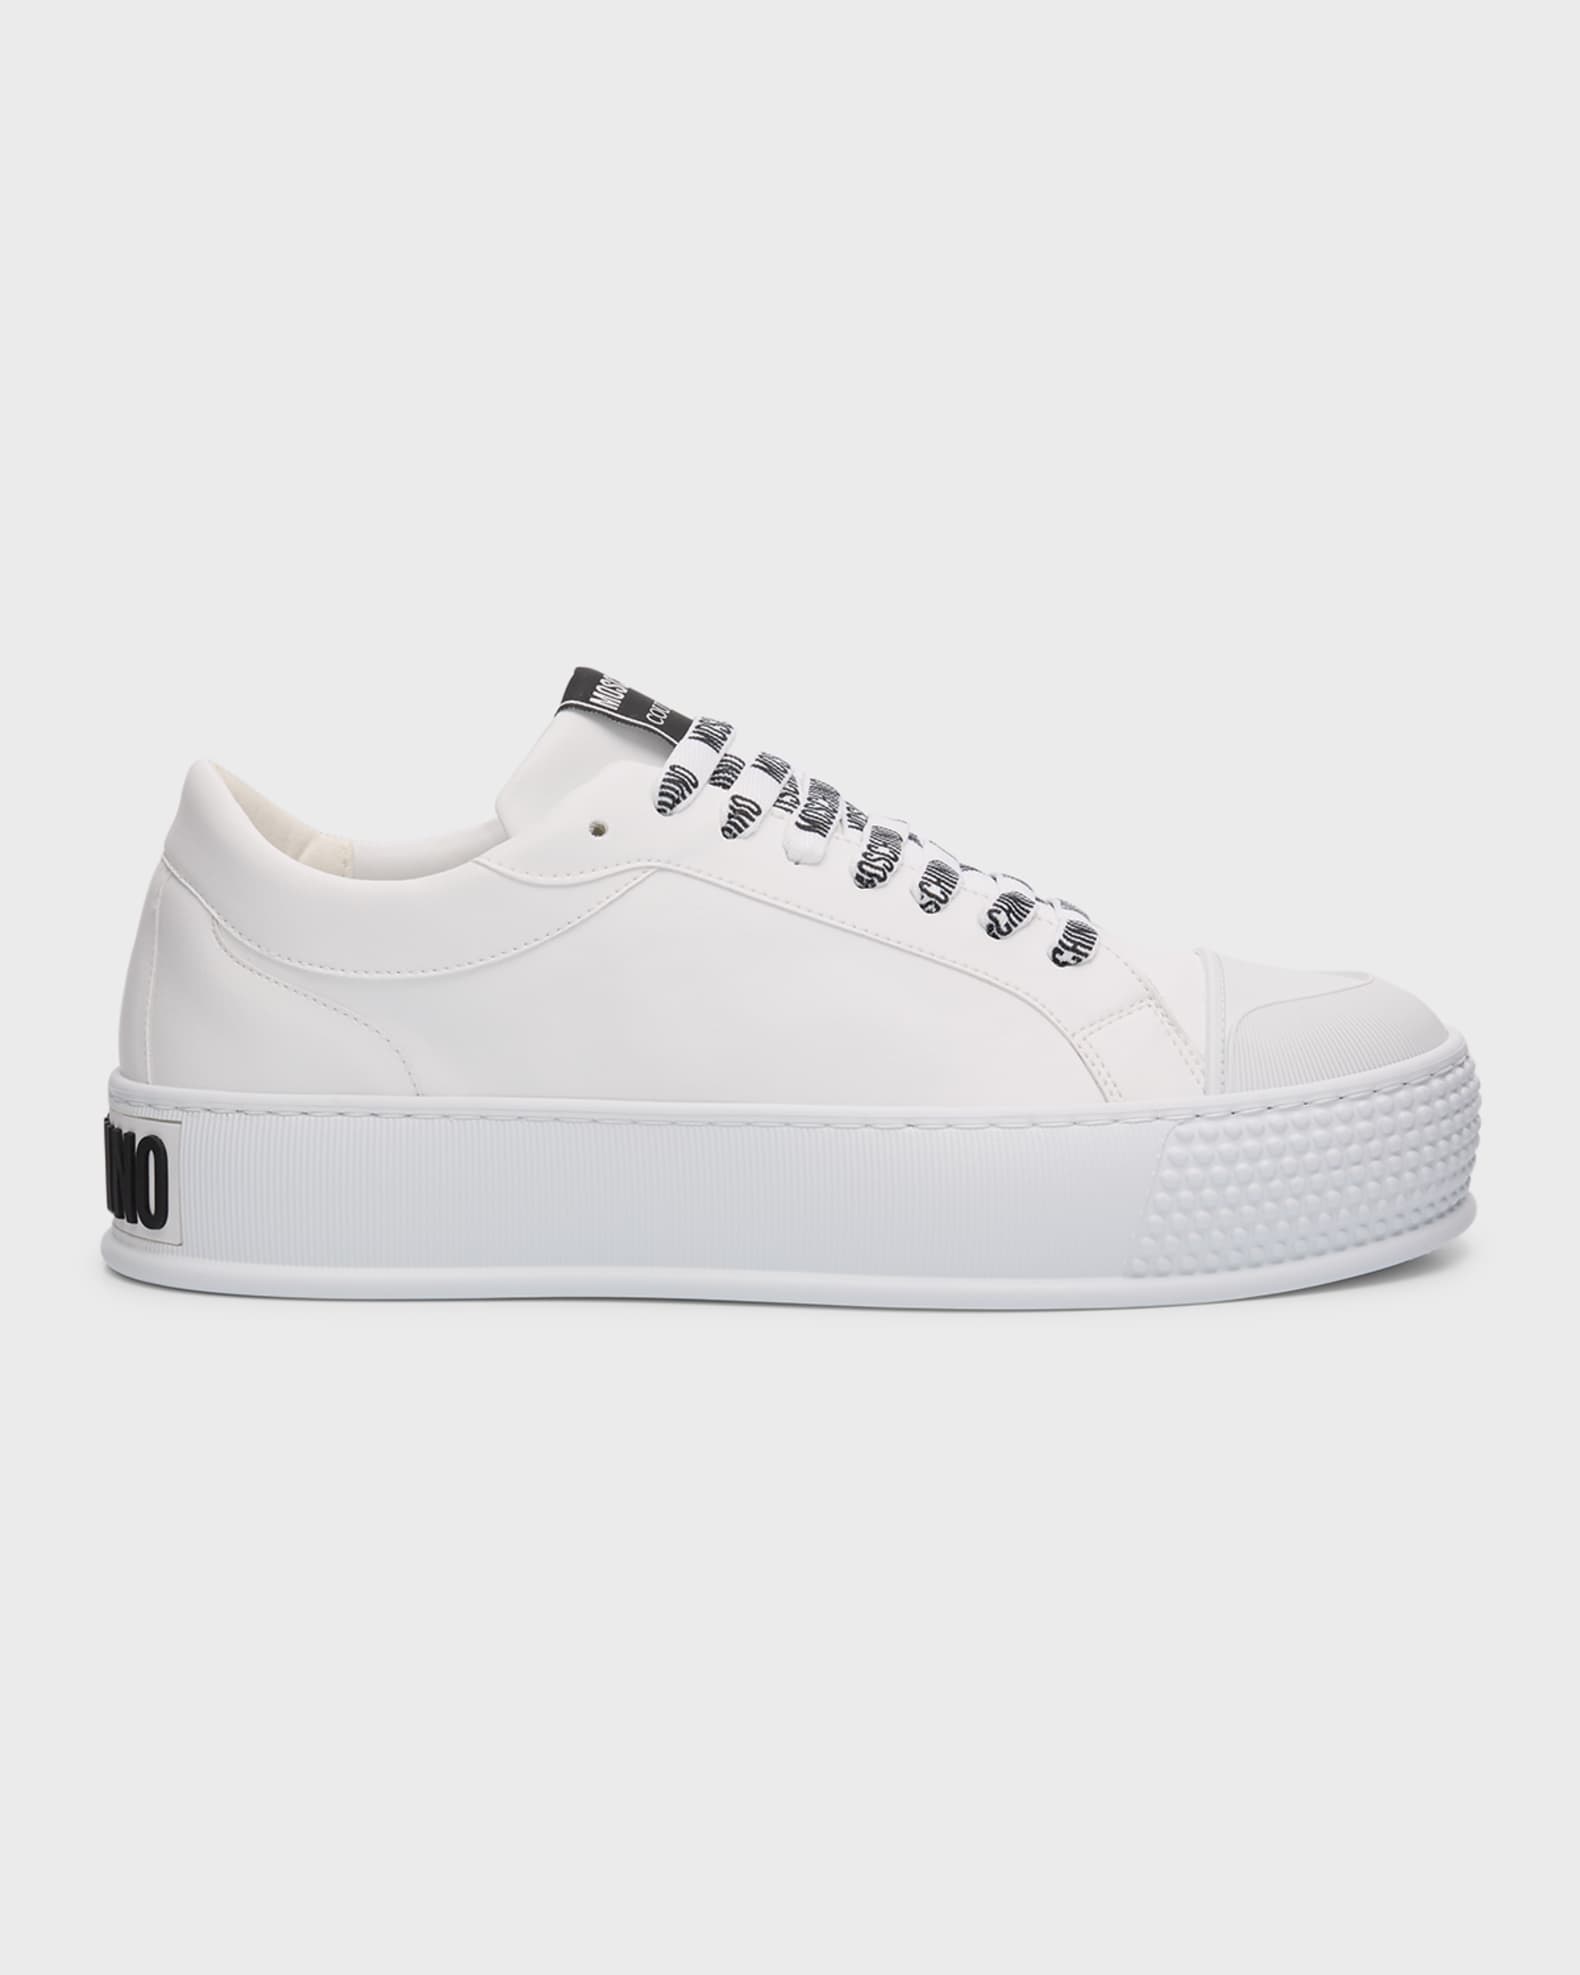 Moschino Men's Logo Low-top Leather Sneakers - Cream - Size 10